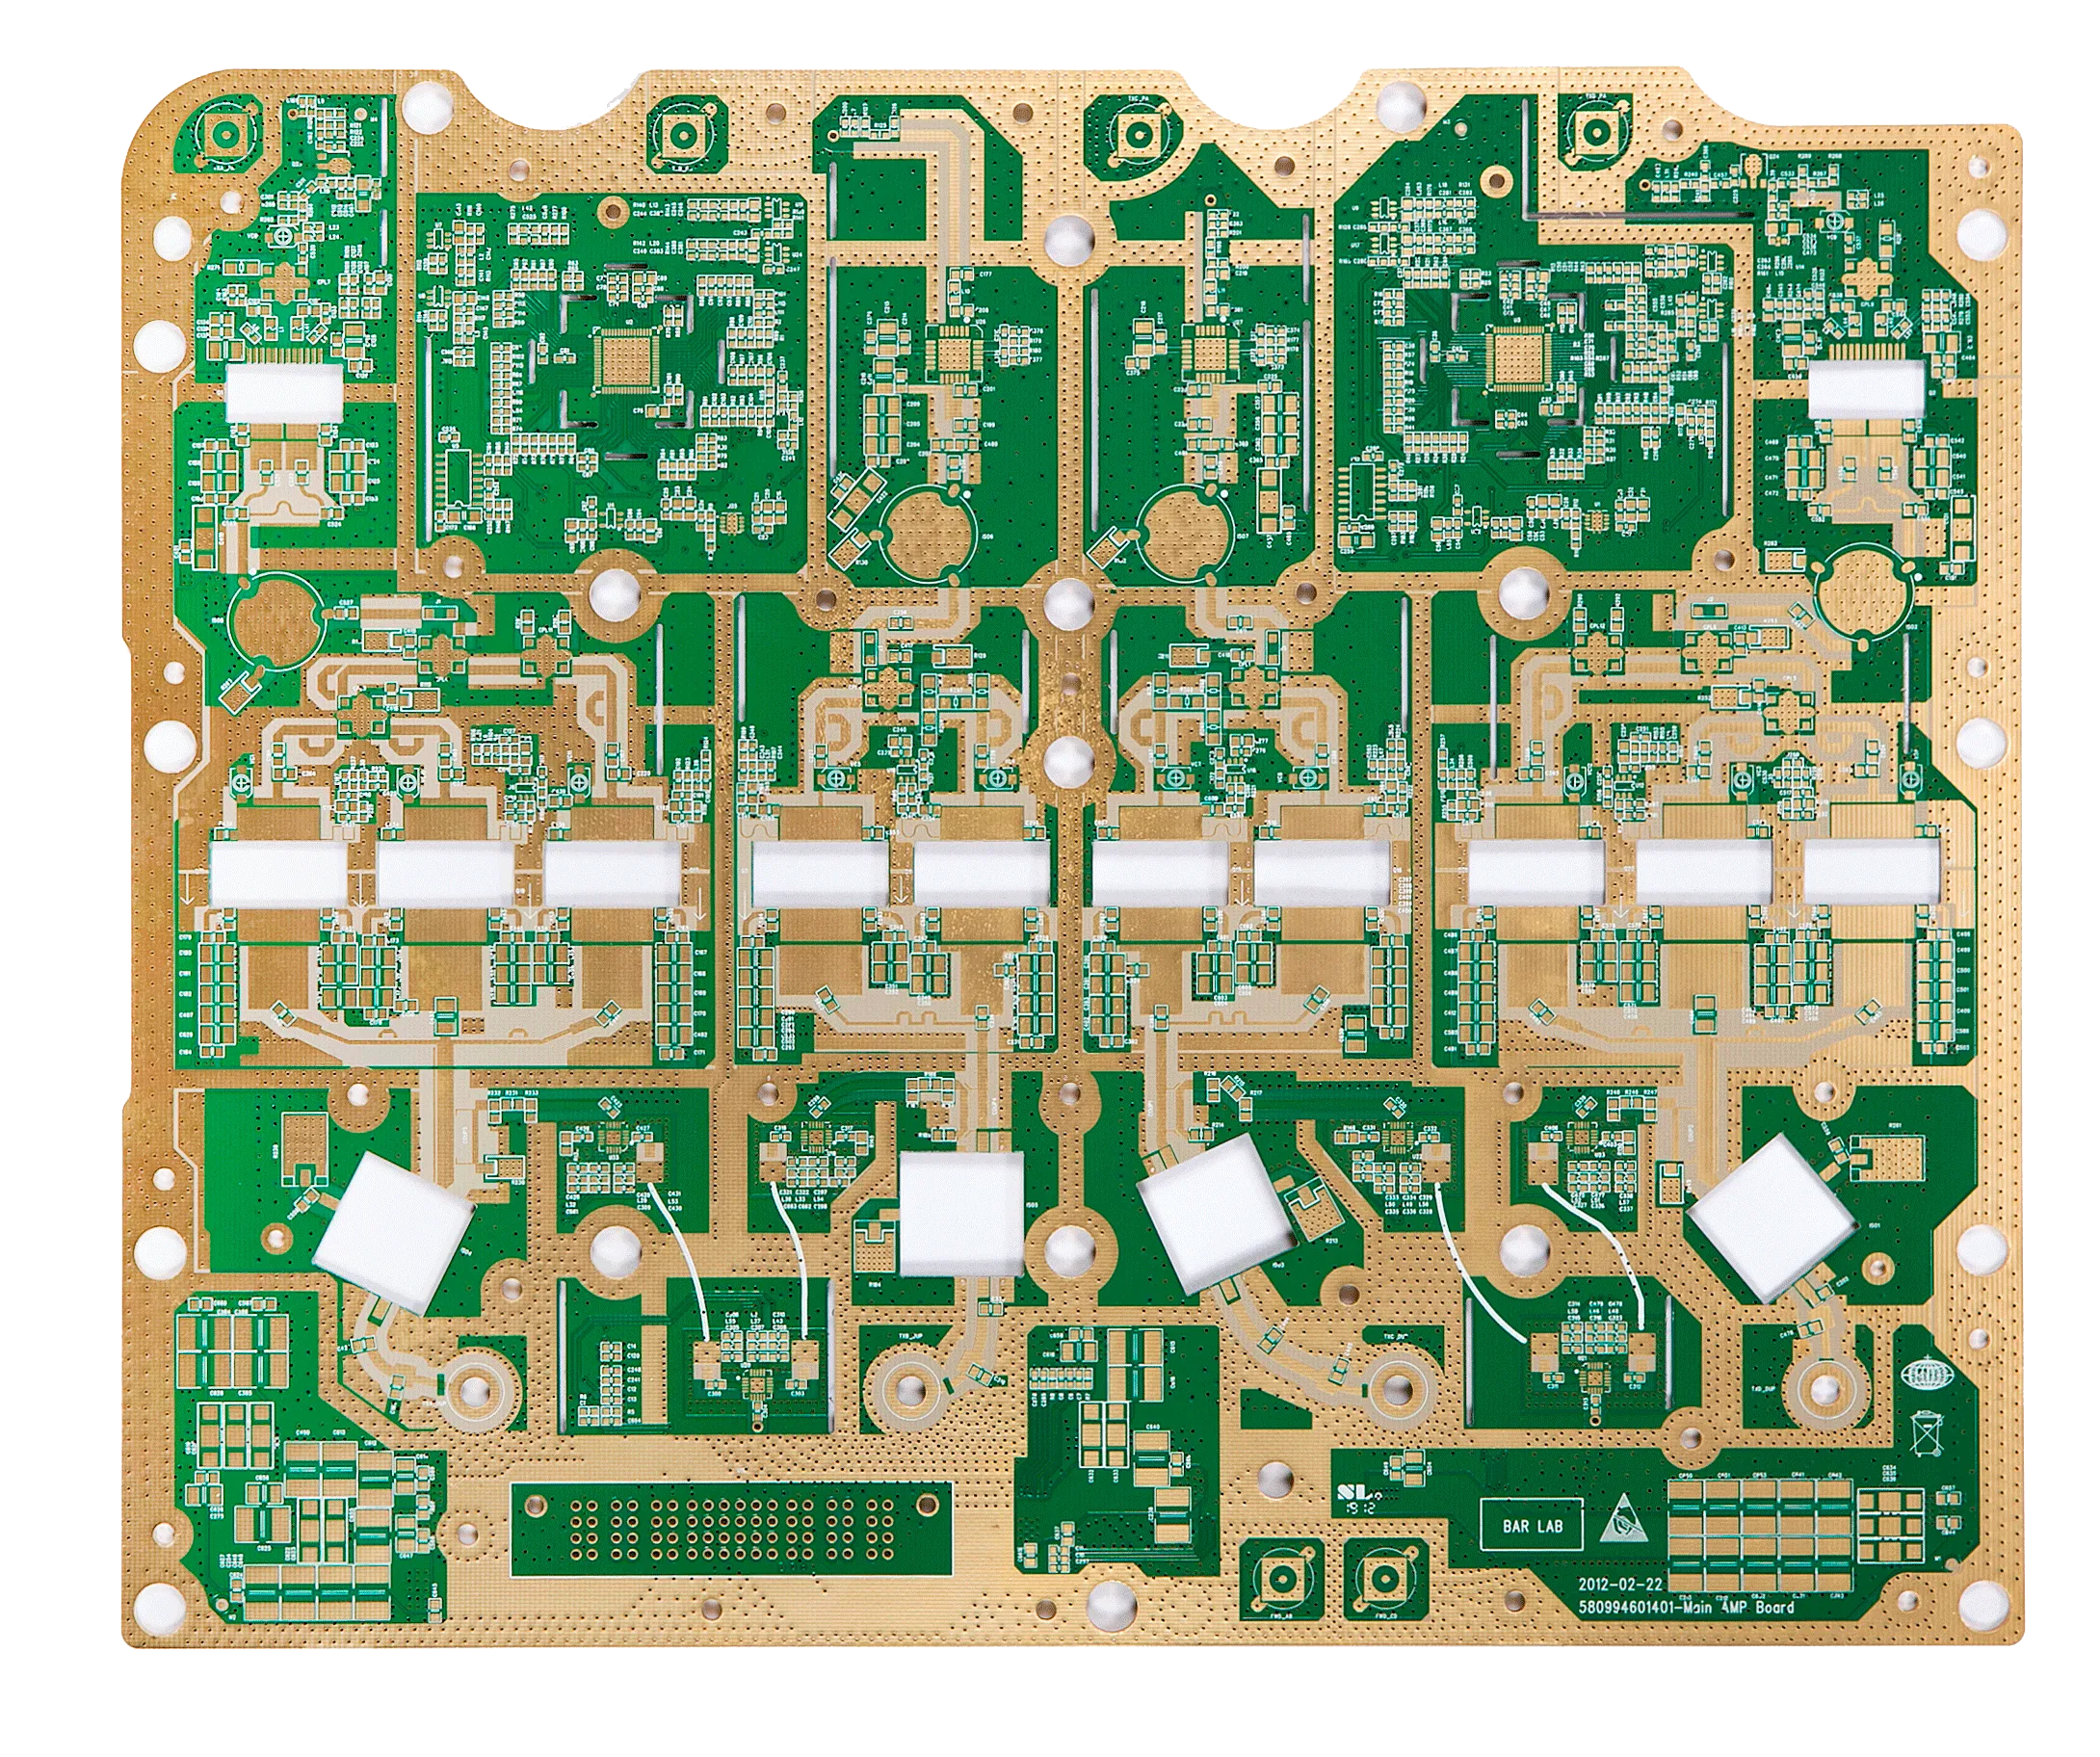 New trends in the development of PCB technology